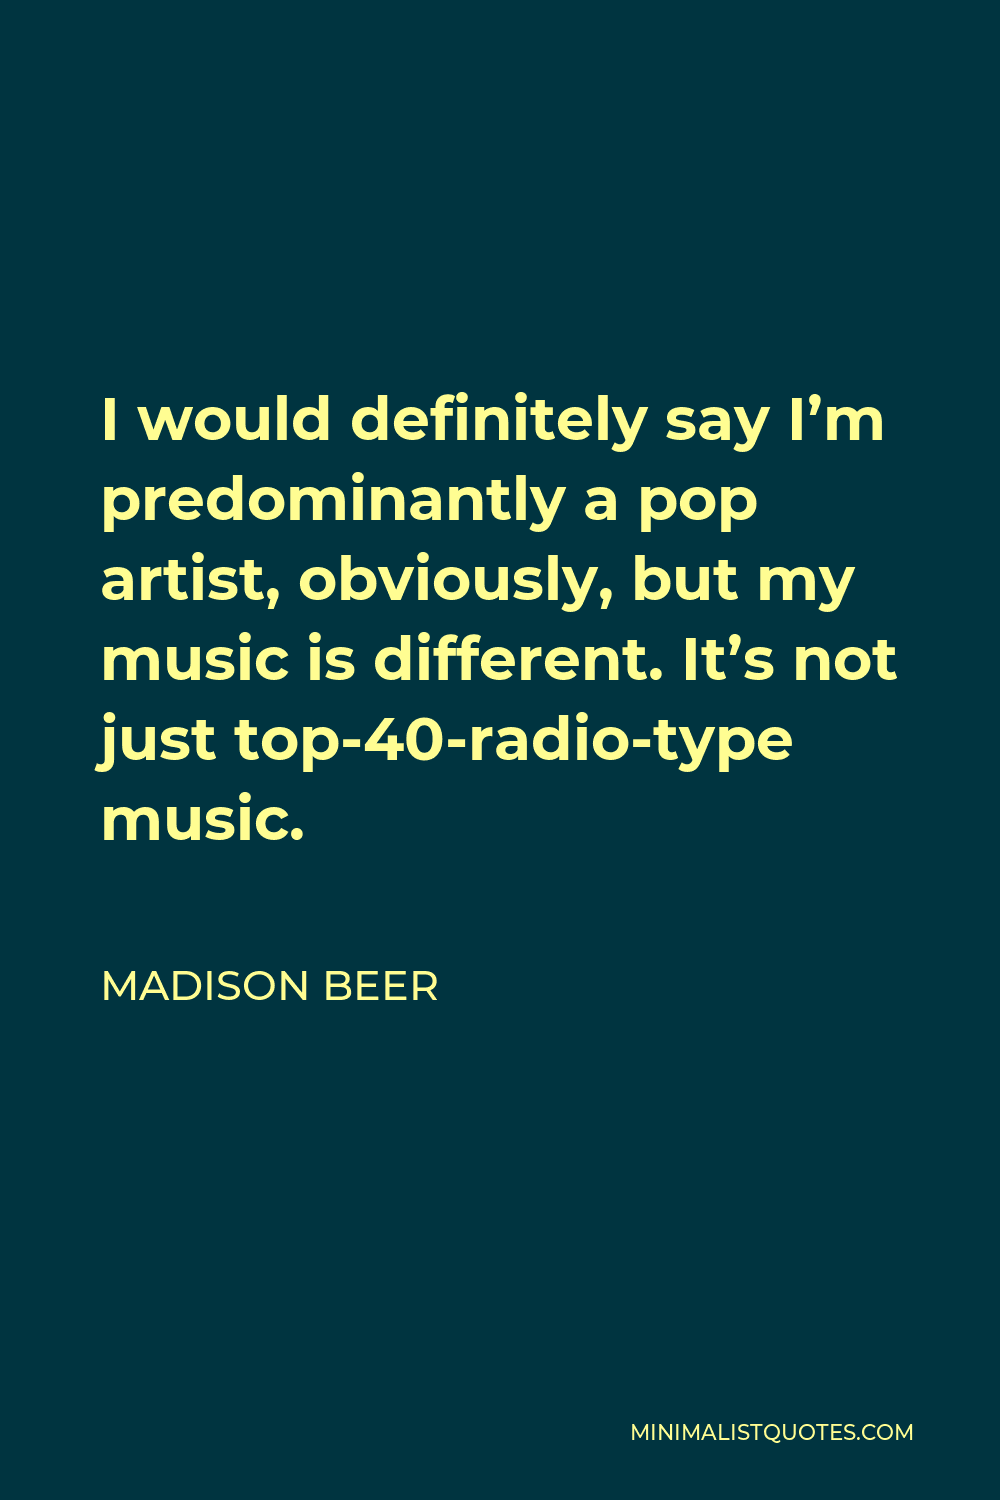 Madison Beer Quote - I would definitely say I’m predominantly a pop artist, obviously, but my music is different. It’s not just top-40-radio-type music.